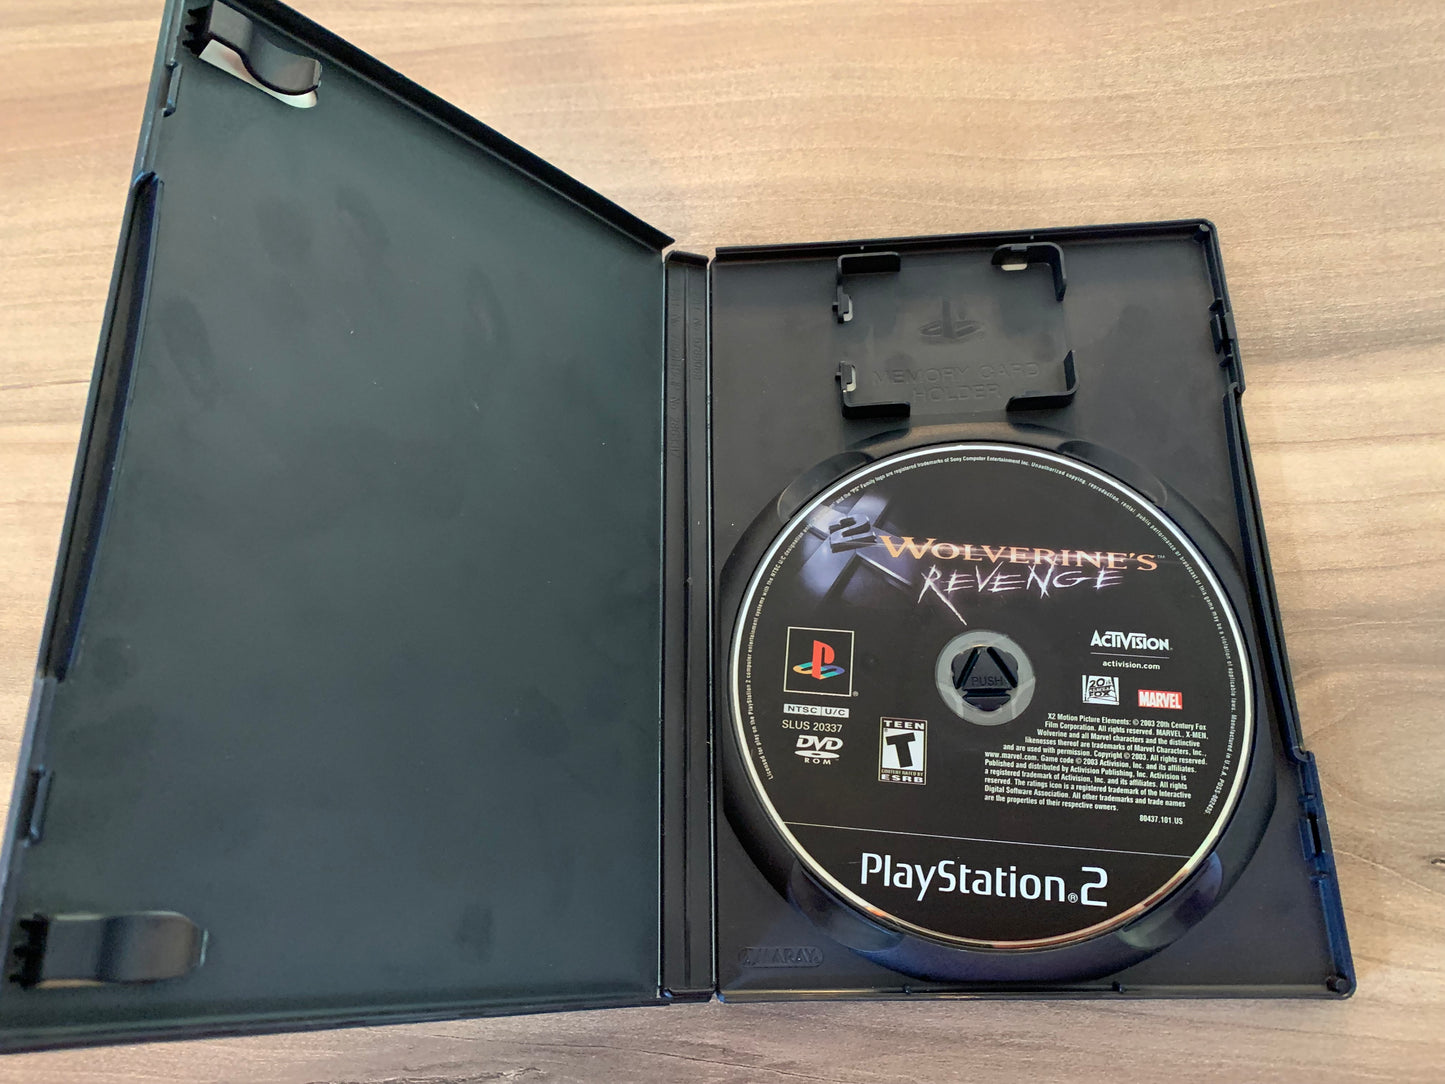 SONY PLAYSTATiON 2 [PS2] | X2 WOLVERiNES REVENGE